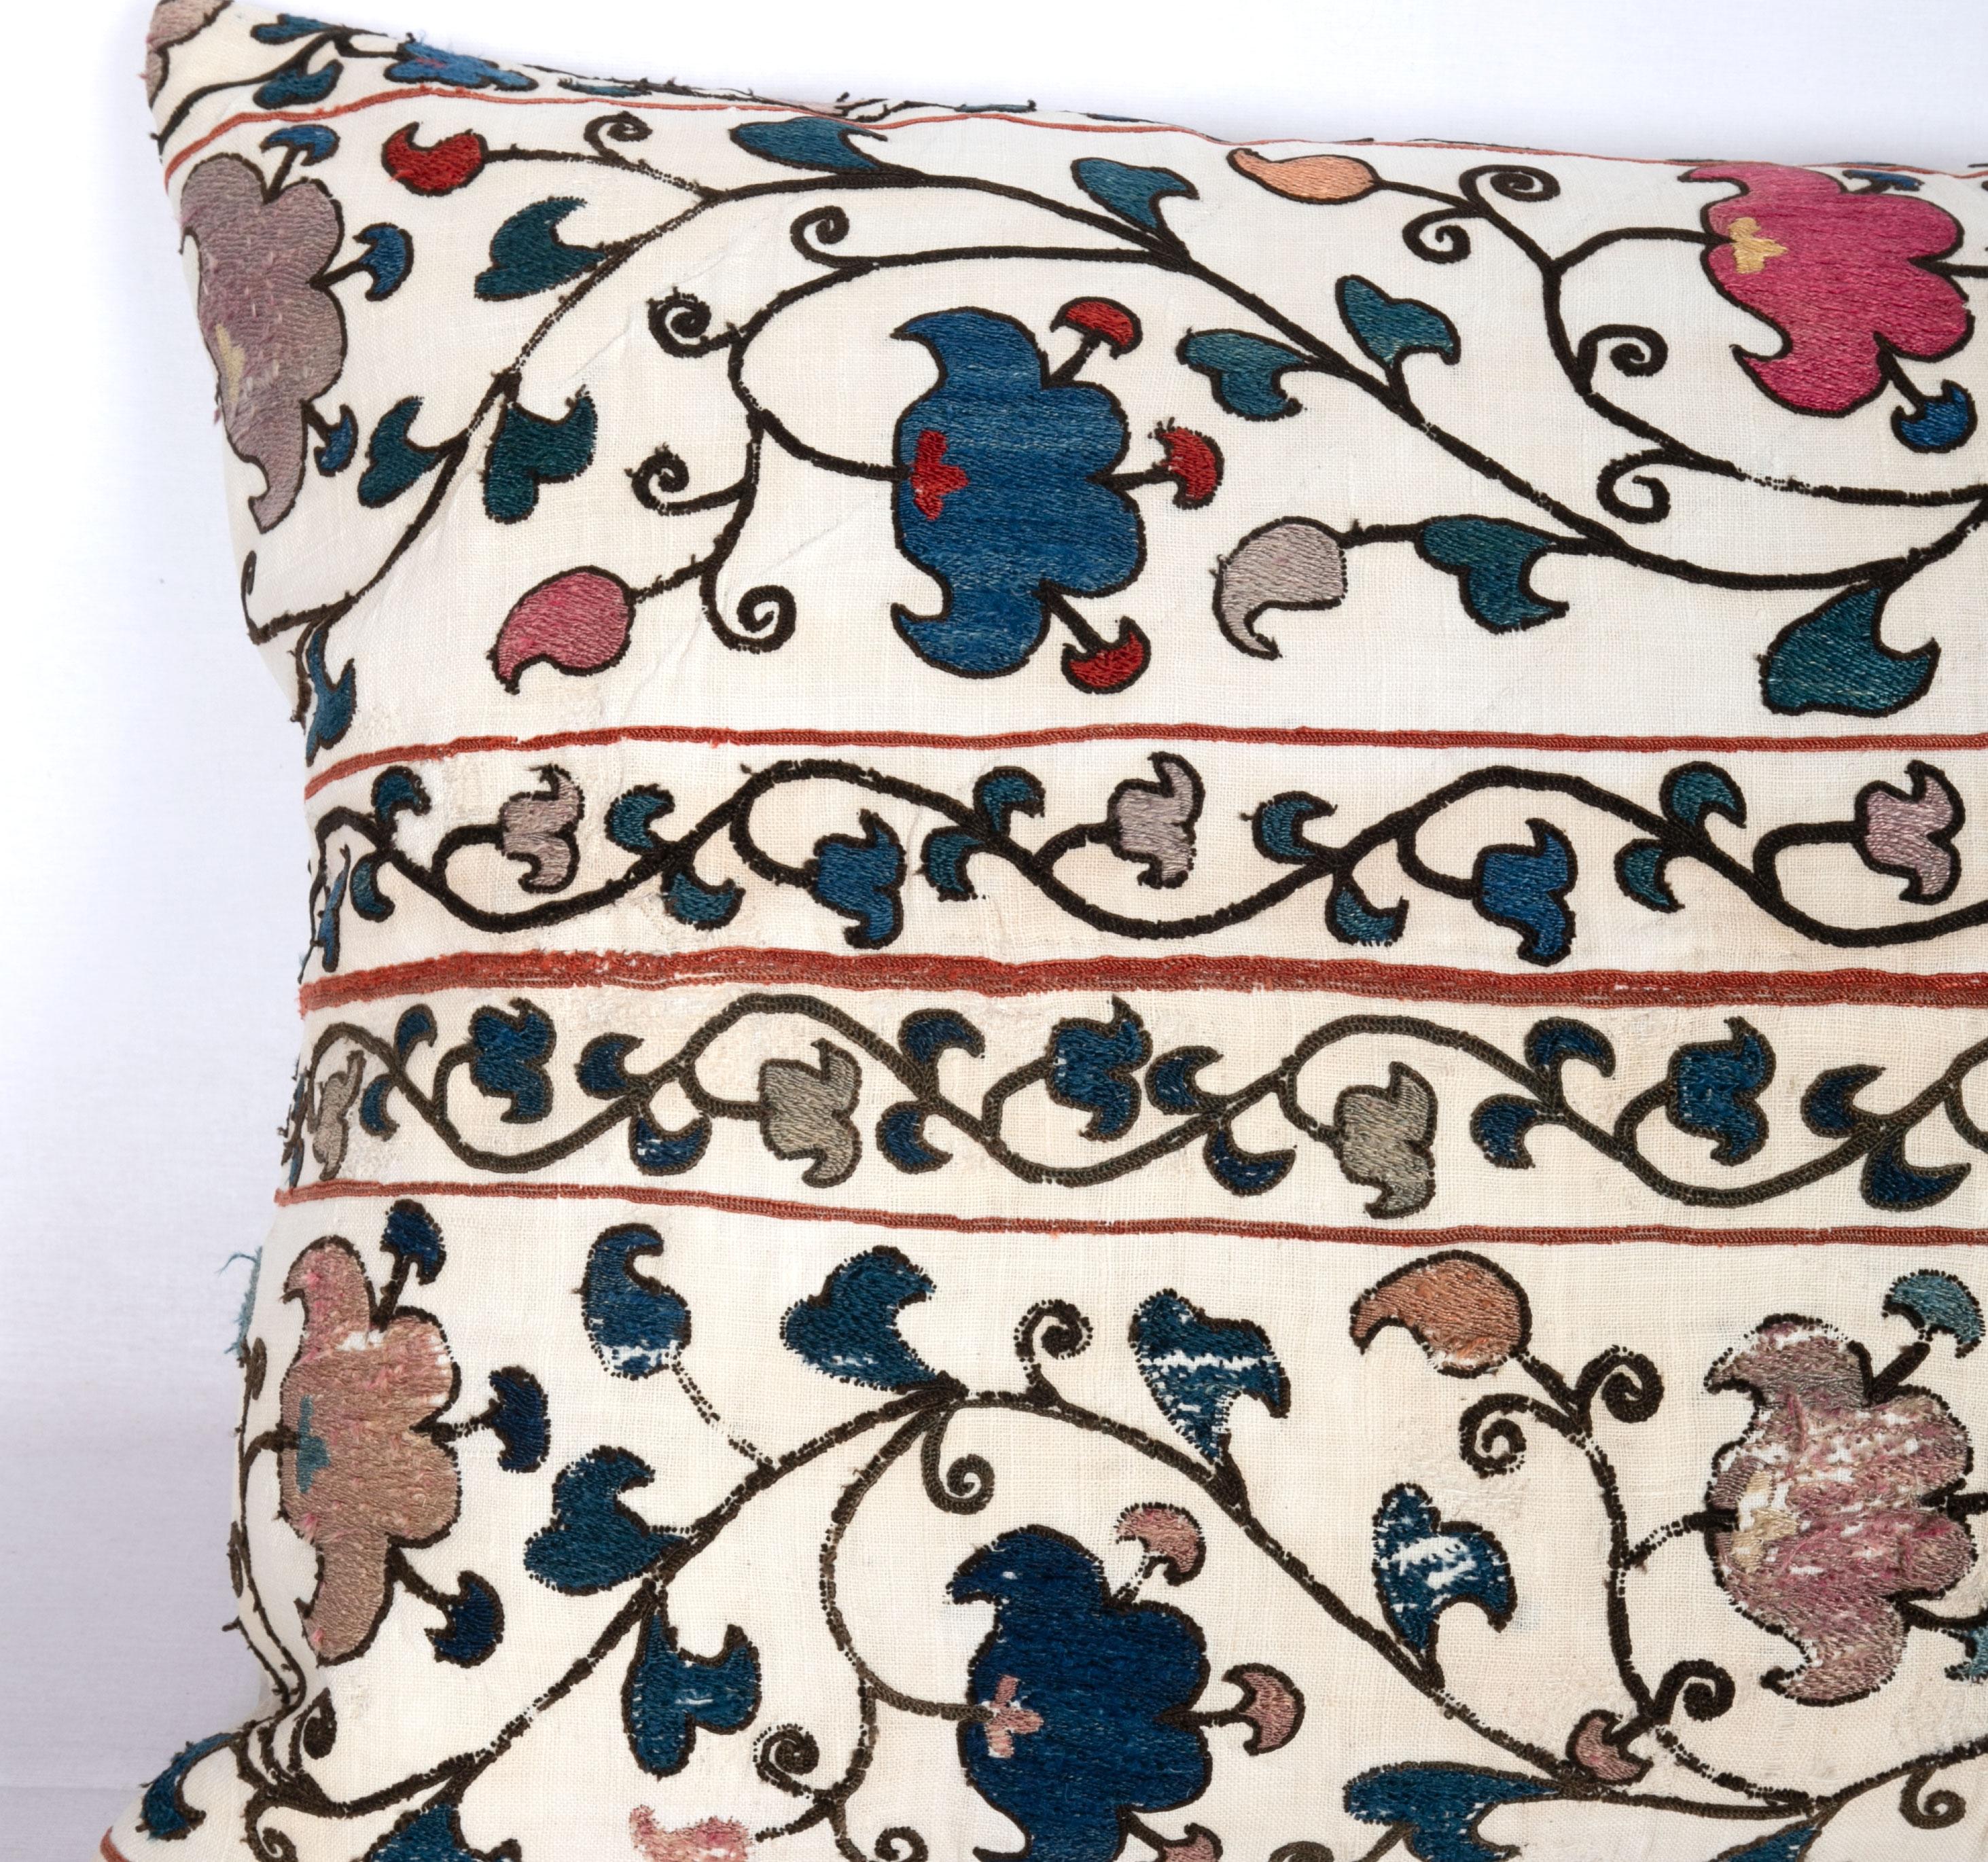 Embroidered Antique Suzani Pillow Case Made from a 19th Century Uzbek Suzani